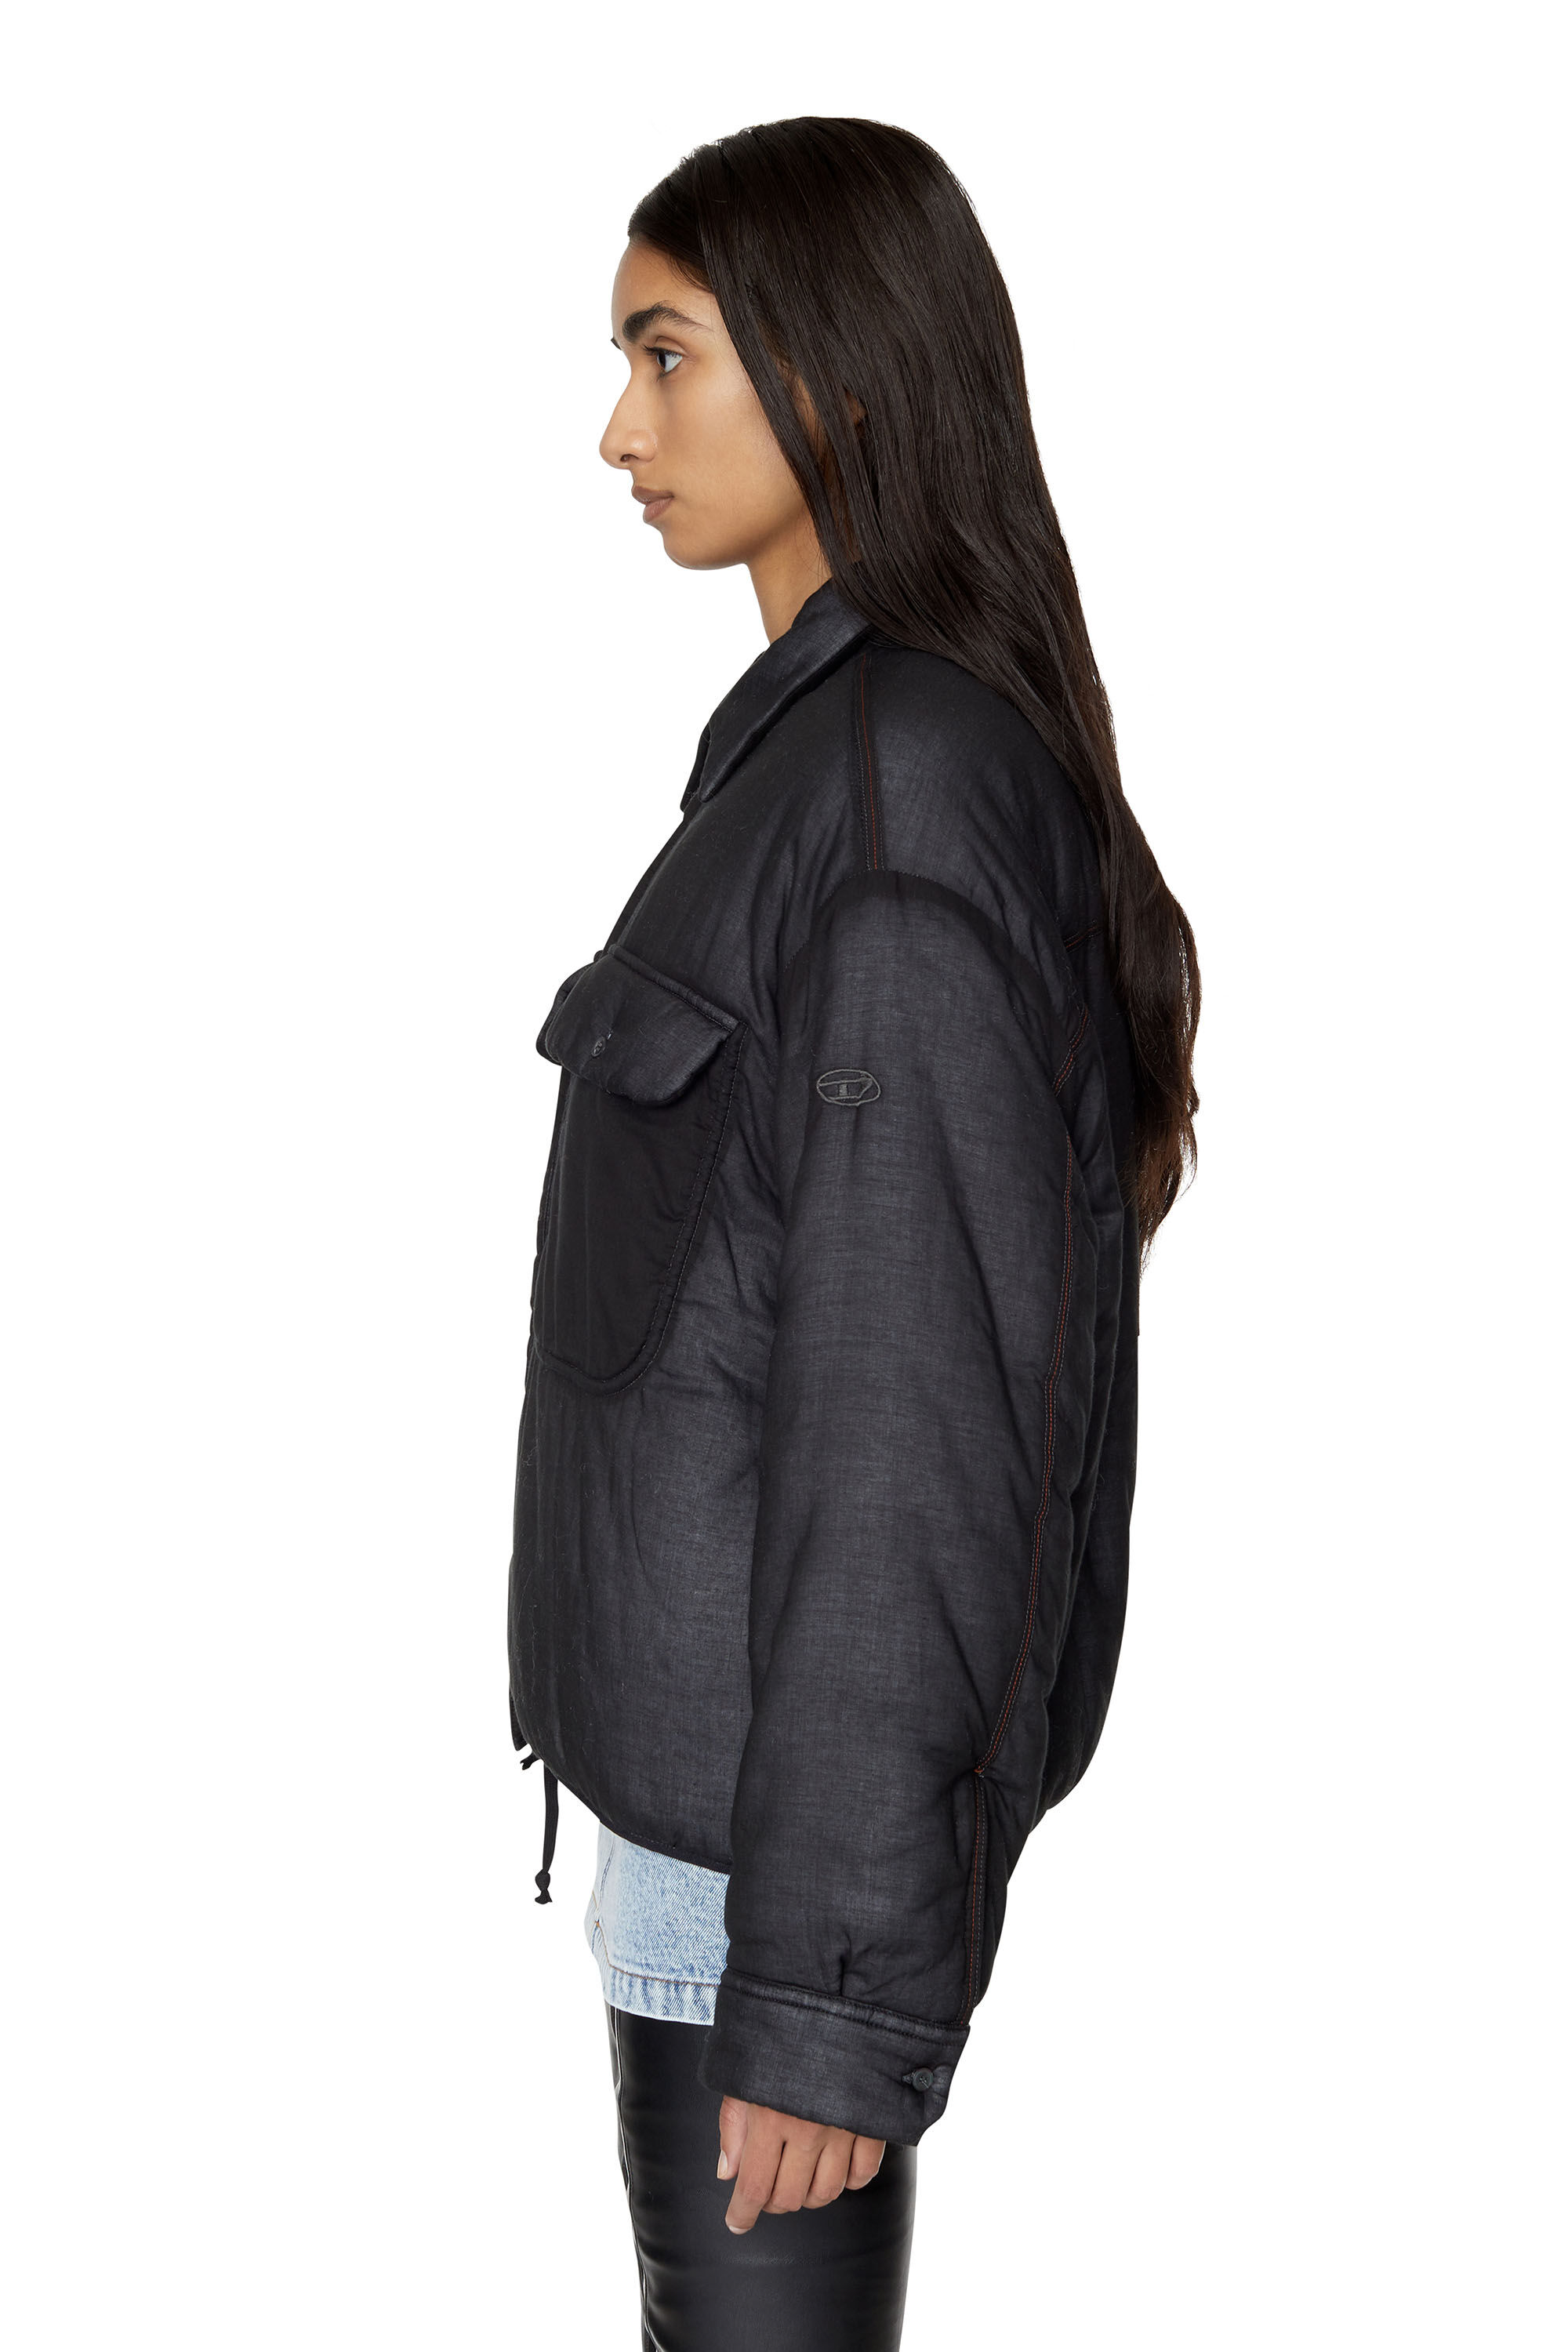 Diesel Padded G-CLIVIA Jacket with Double Breast Pocket women - Glamood  Outlet